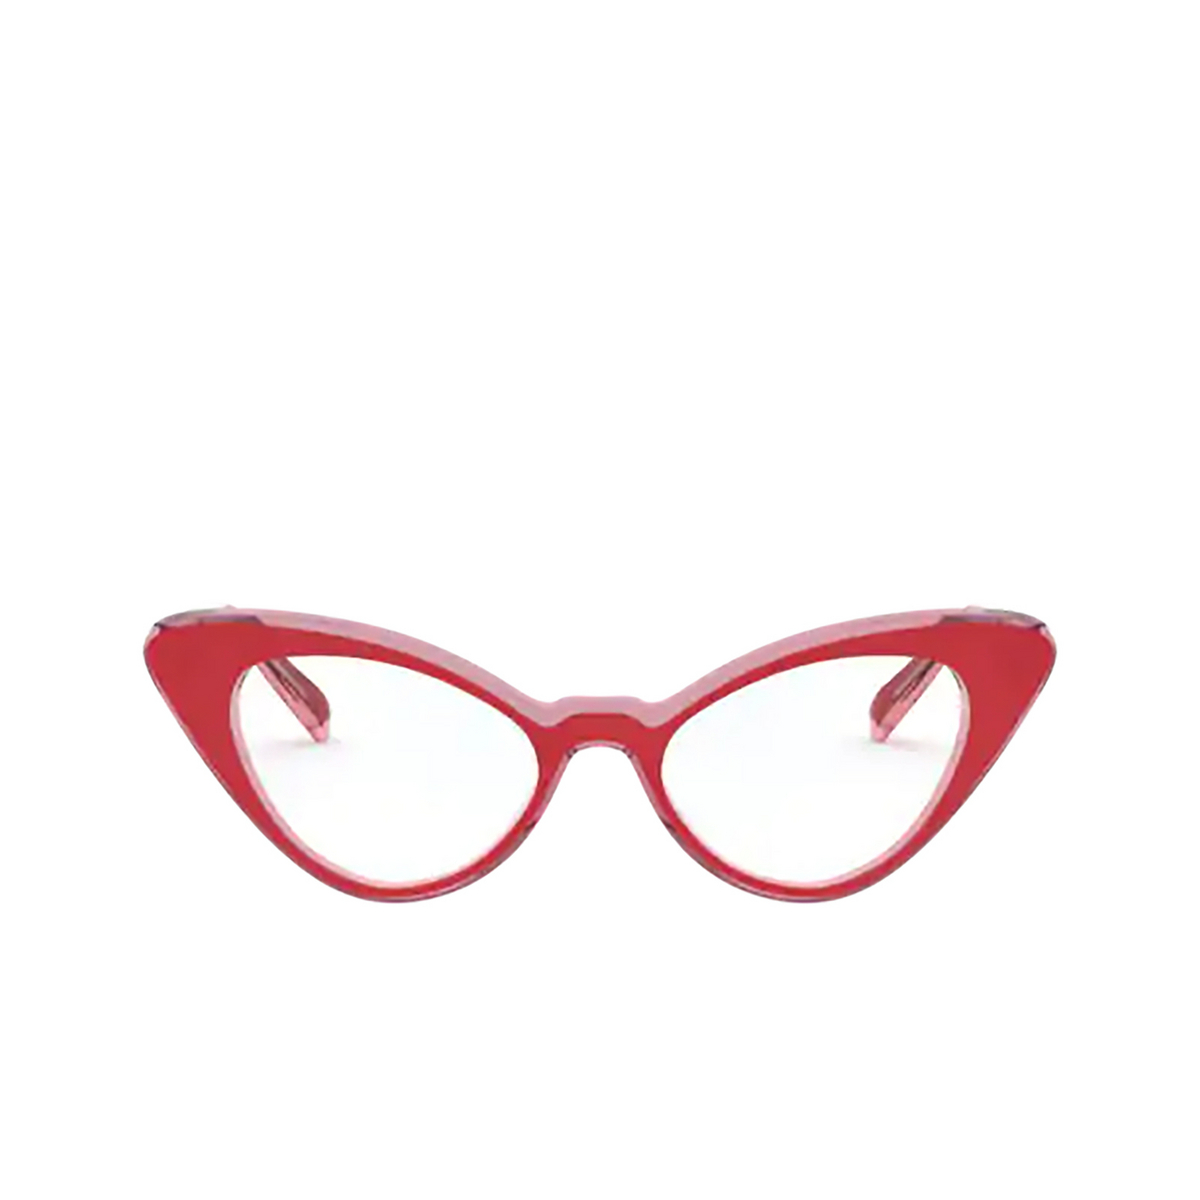 Vogue® Cat-eye Eyeglasses: VO5317 color Top Red / Pink Transparent 2811 - front view.